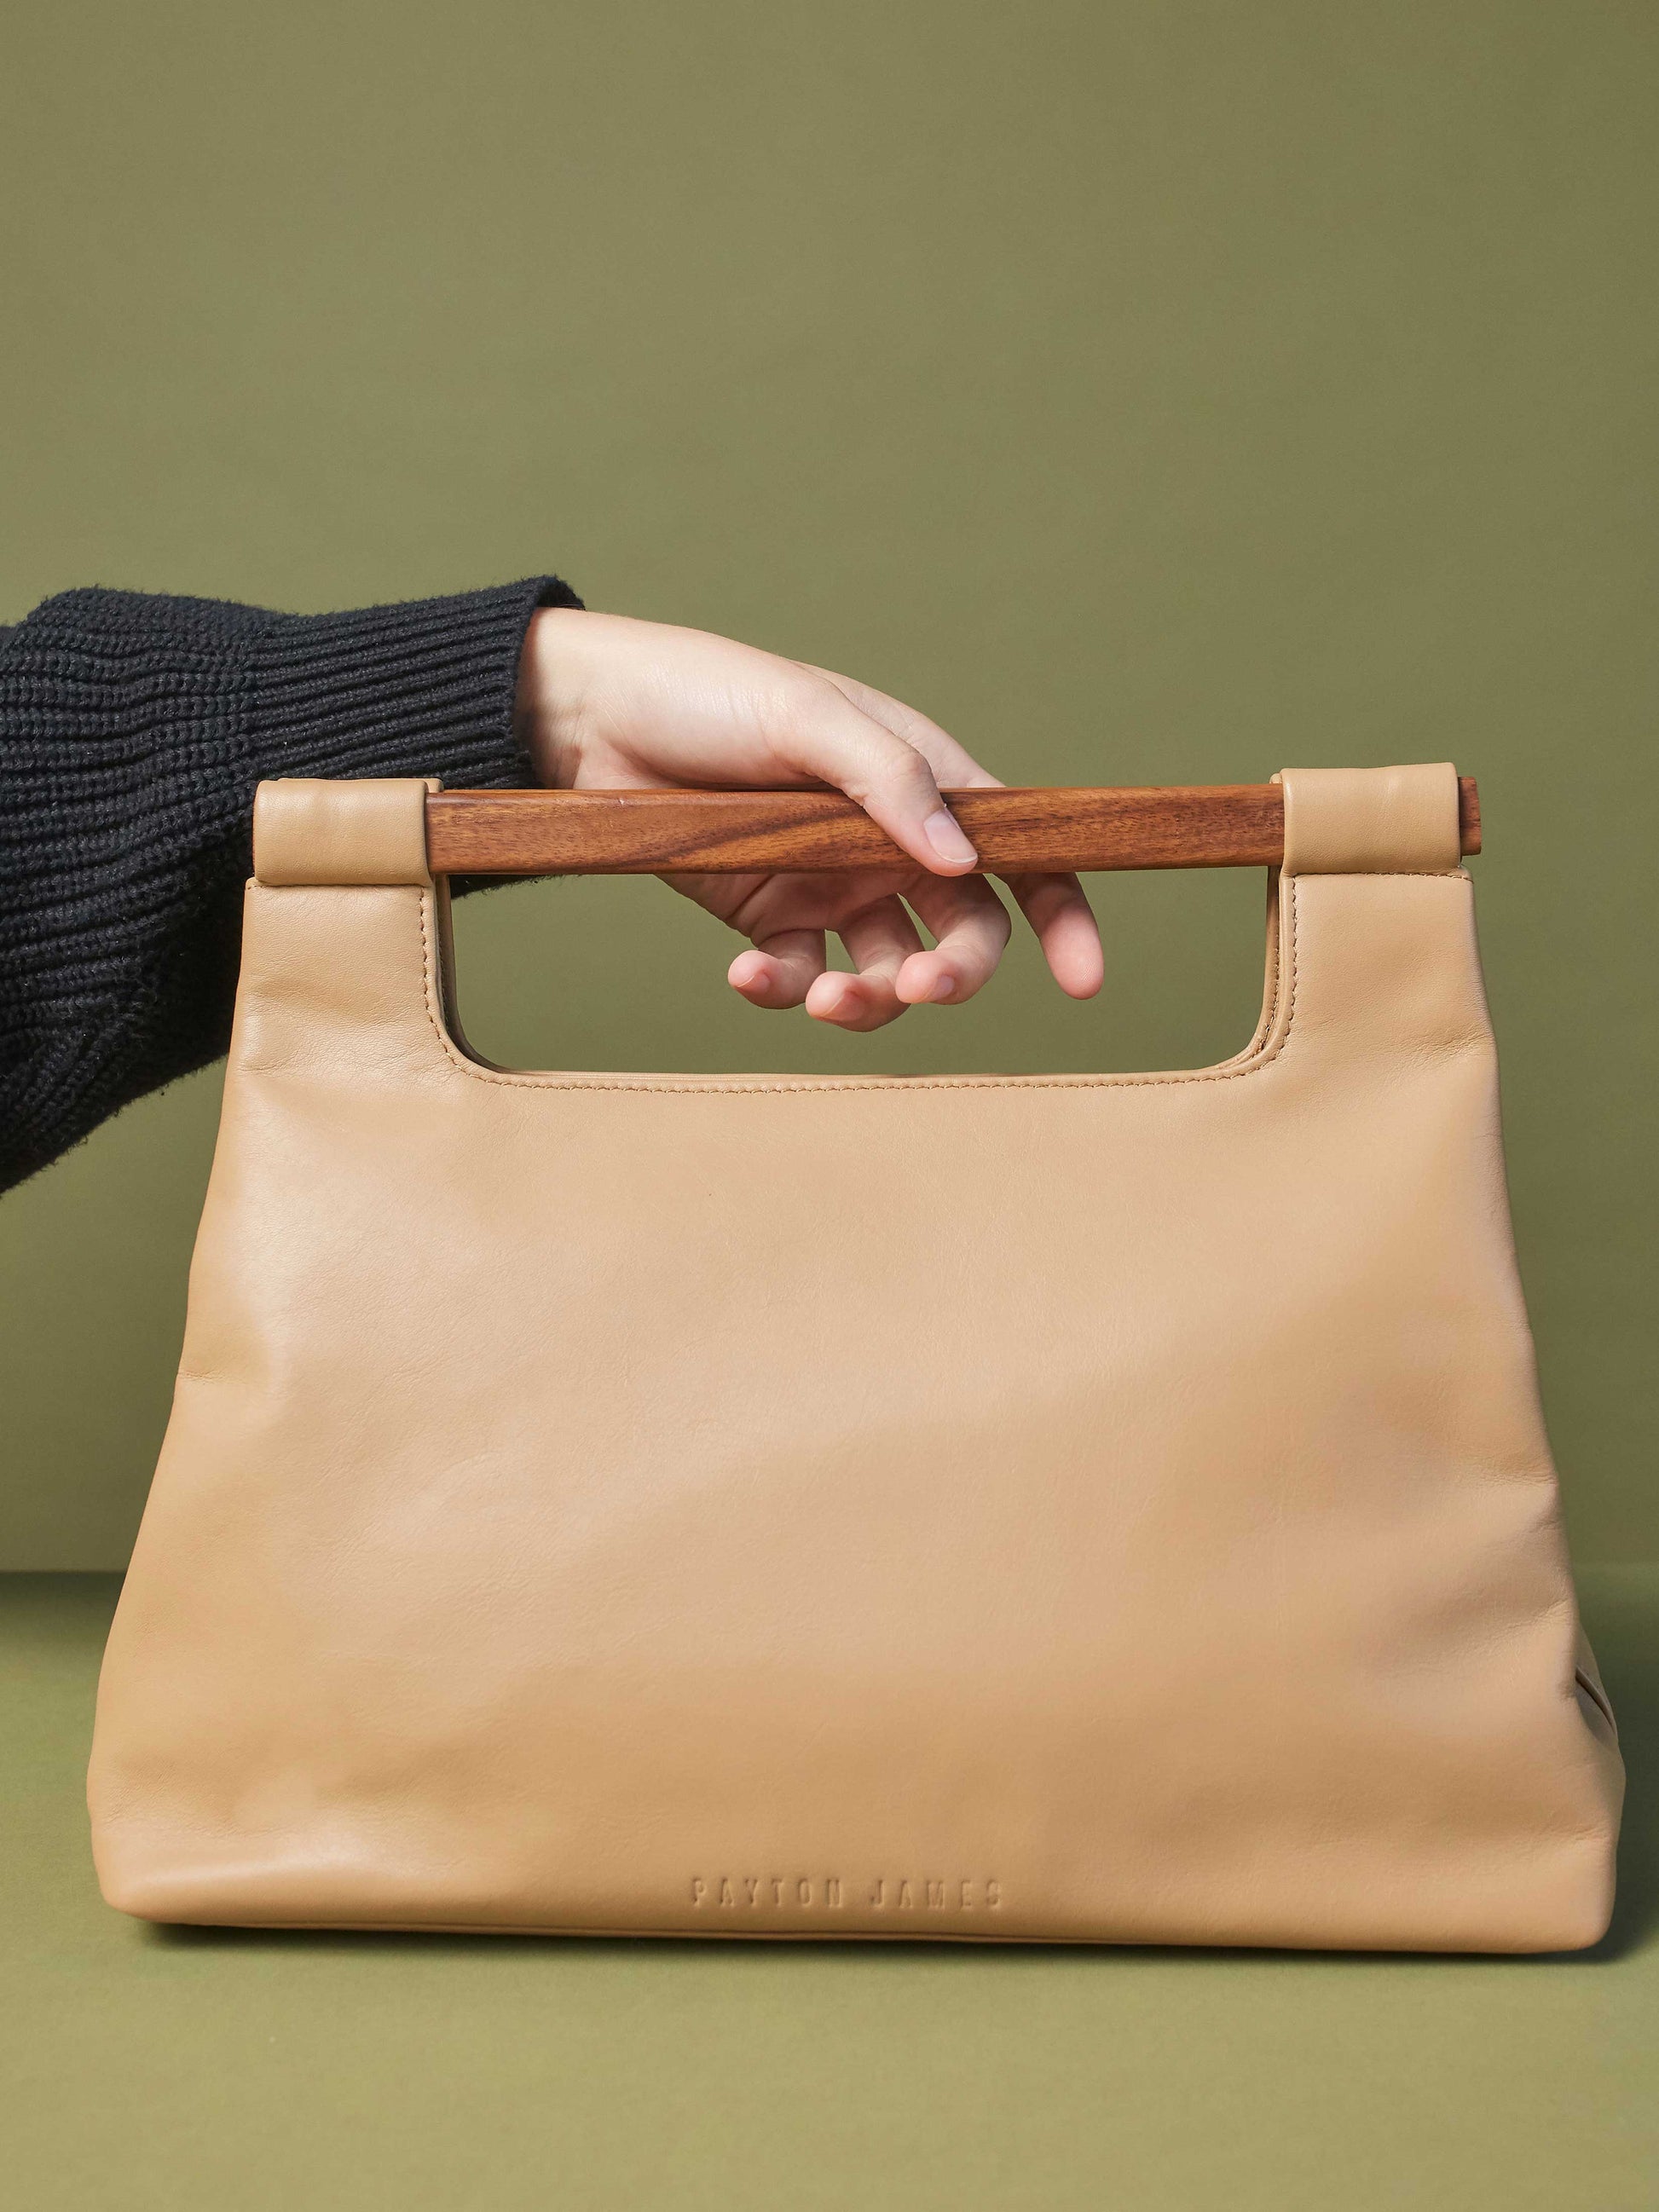 Leather-Tote-Handbag-Wood-Cut-Out-Tote-by-Payton-James-Cappucino-Tan-Color model holding bag